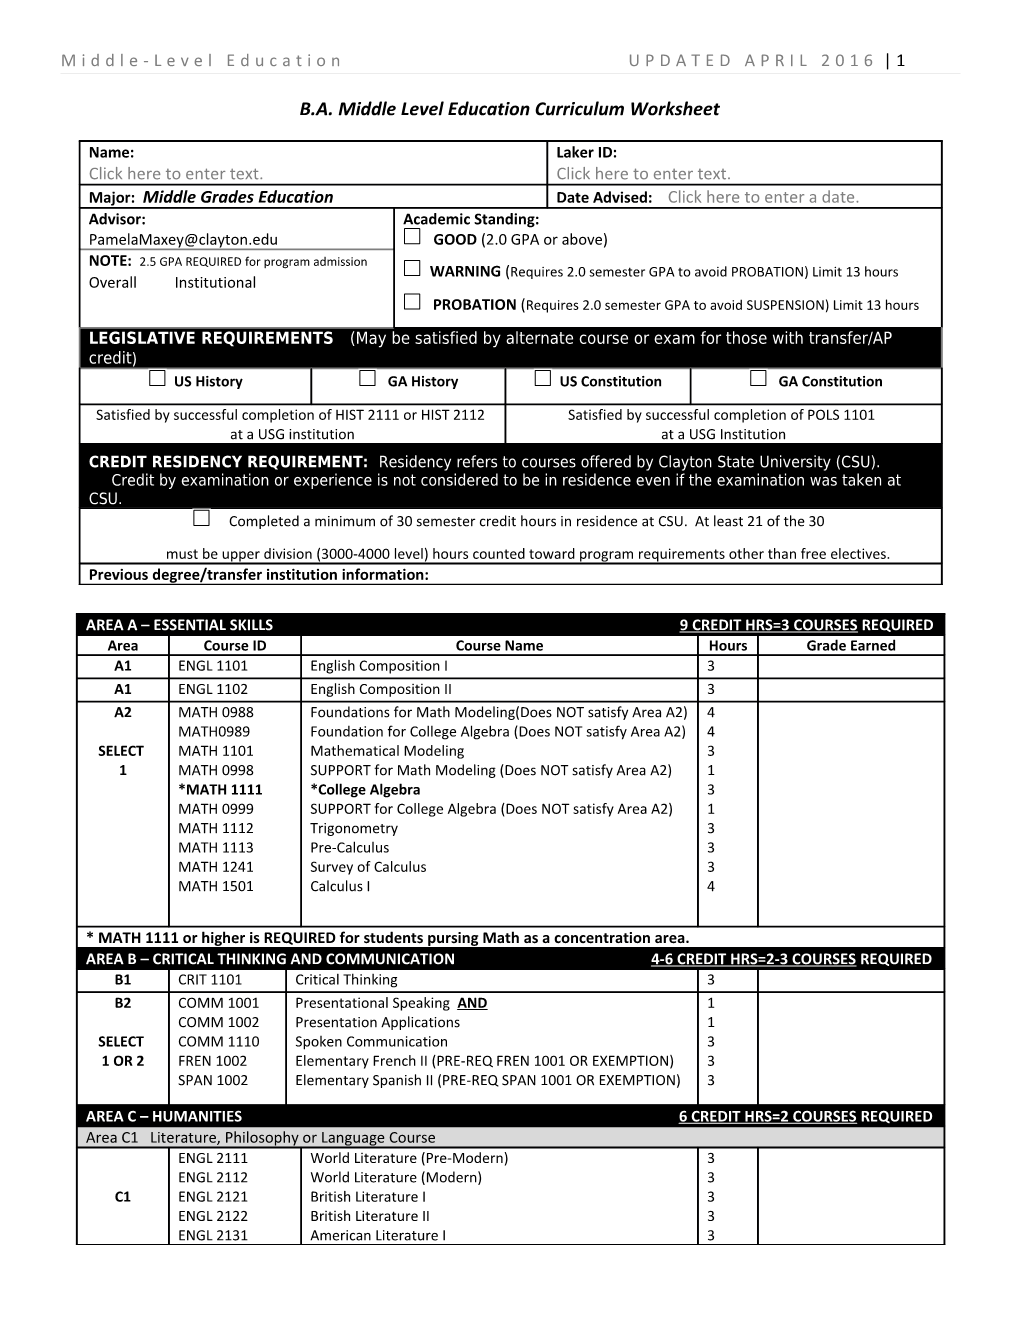 B.A. Middle Level Education Curriculum Worksheet